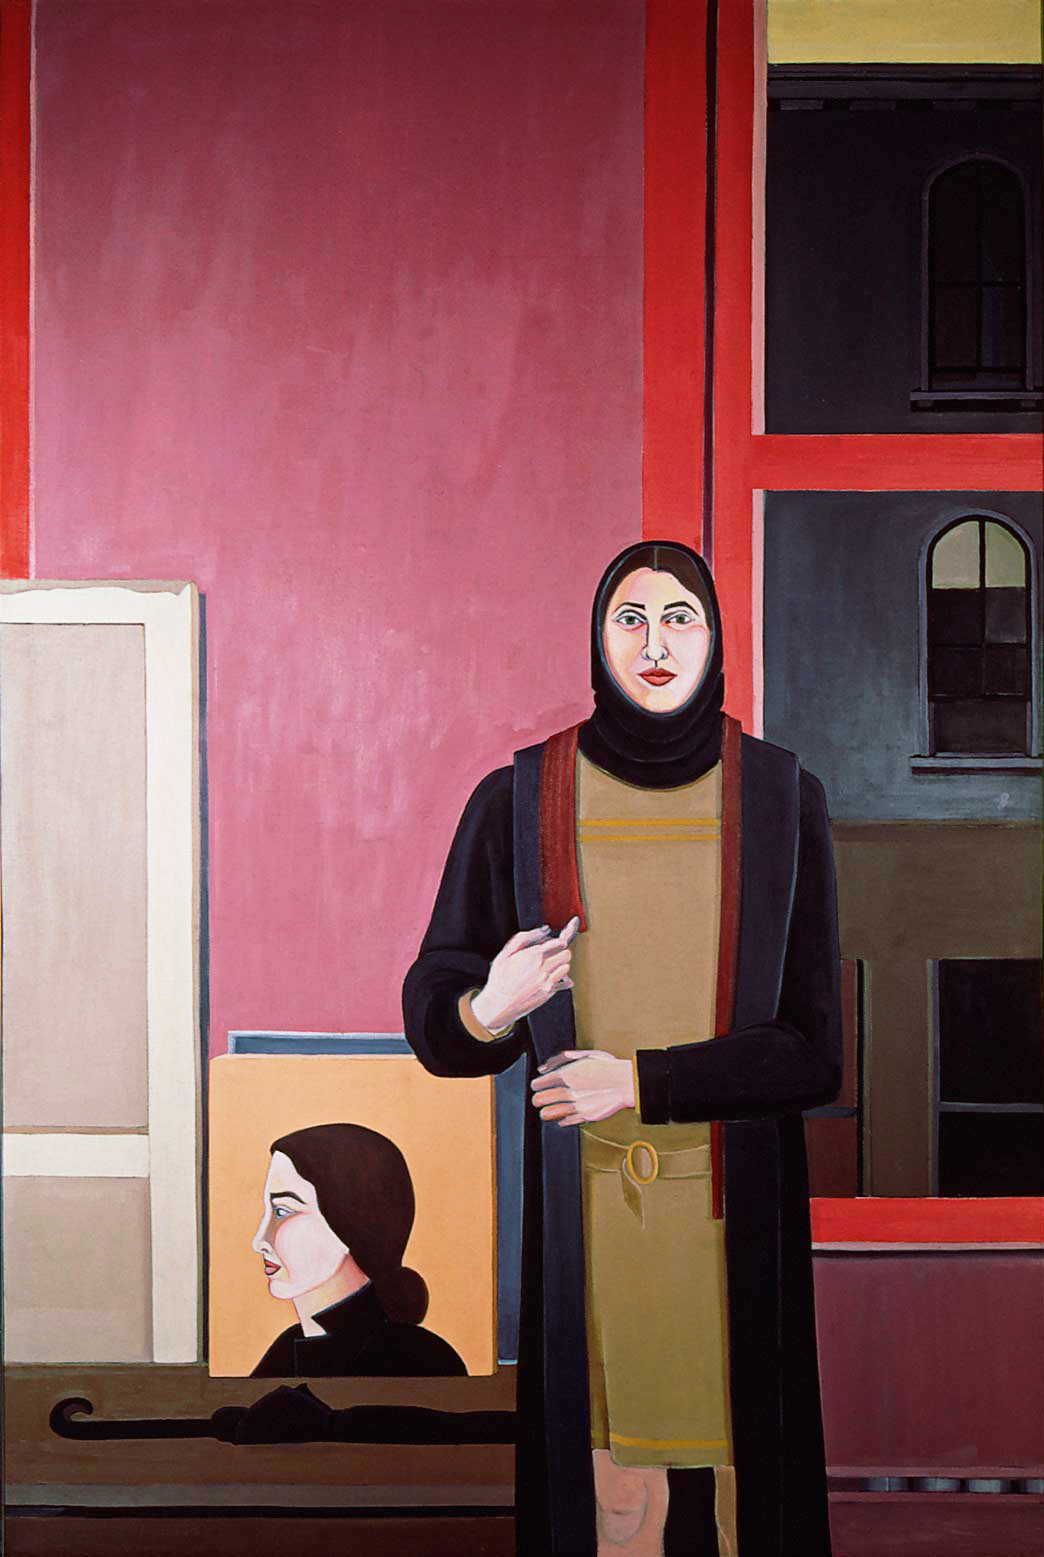 Self Portrait in New York with profile canvas: Large figure painting by Ethel Fisher, 1968, oil on linen, 72 x 48 inches, mid-twentieth century painting.